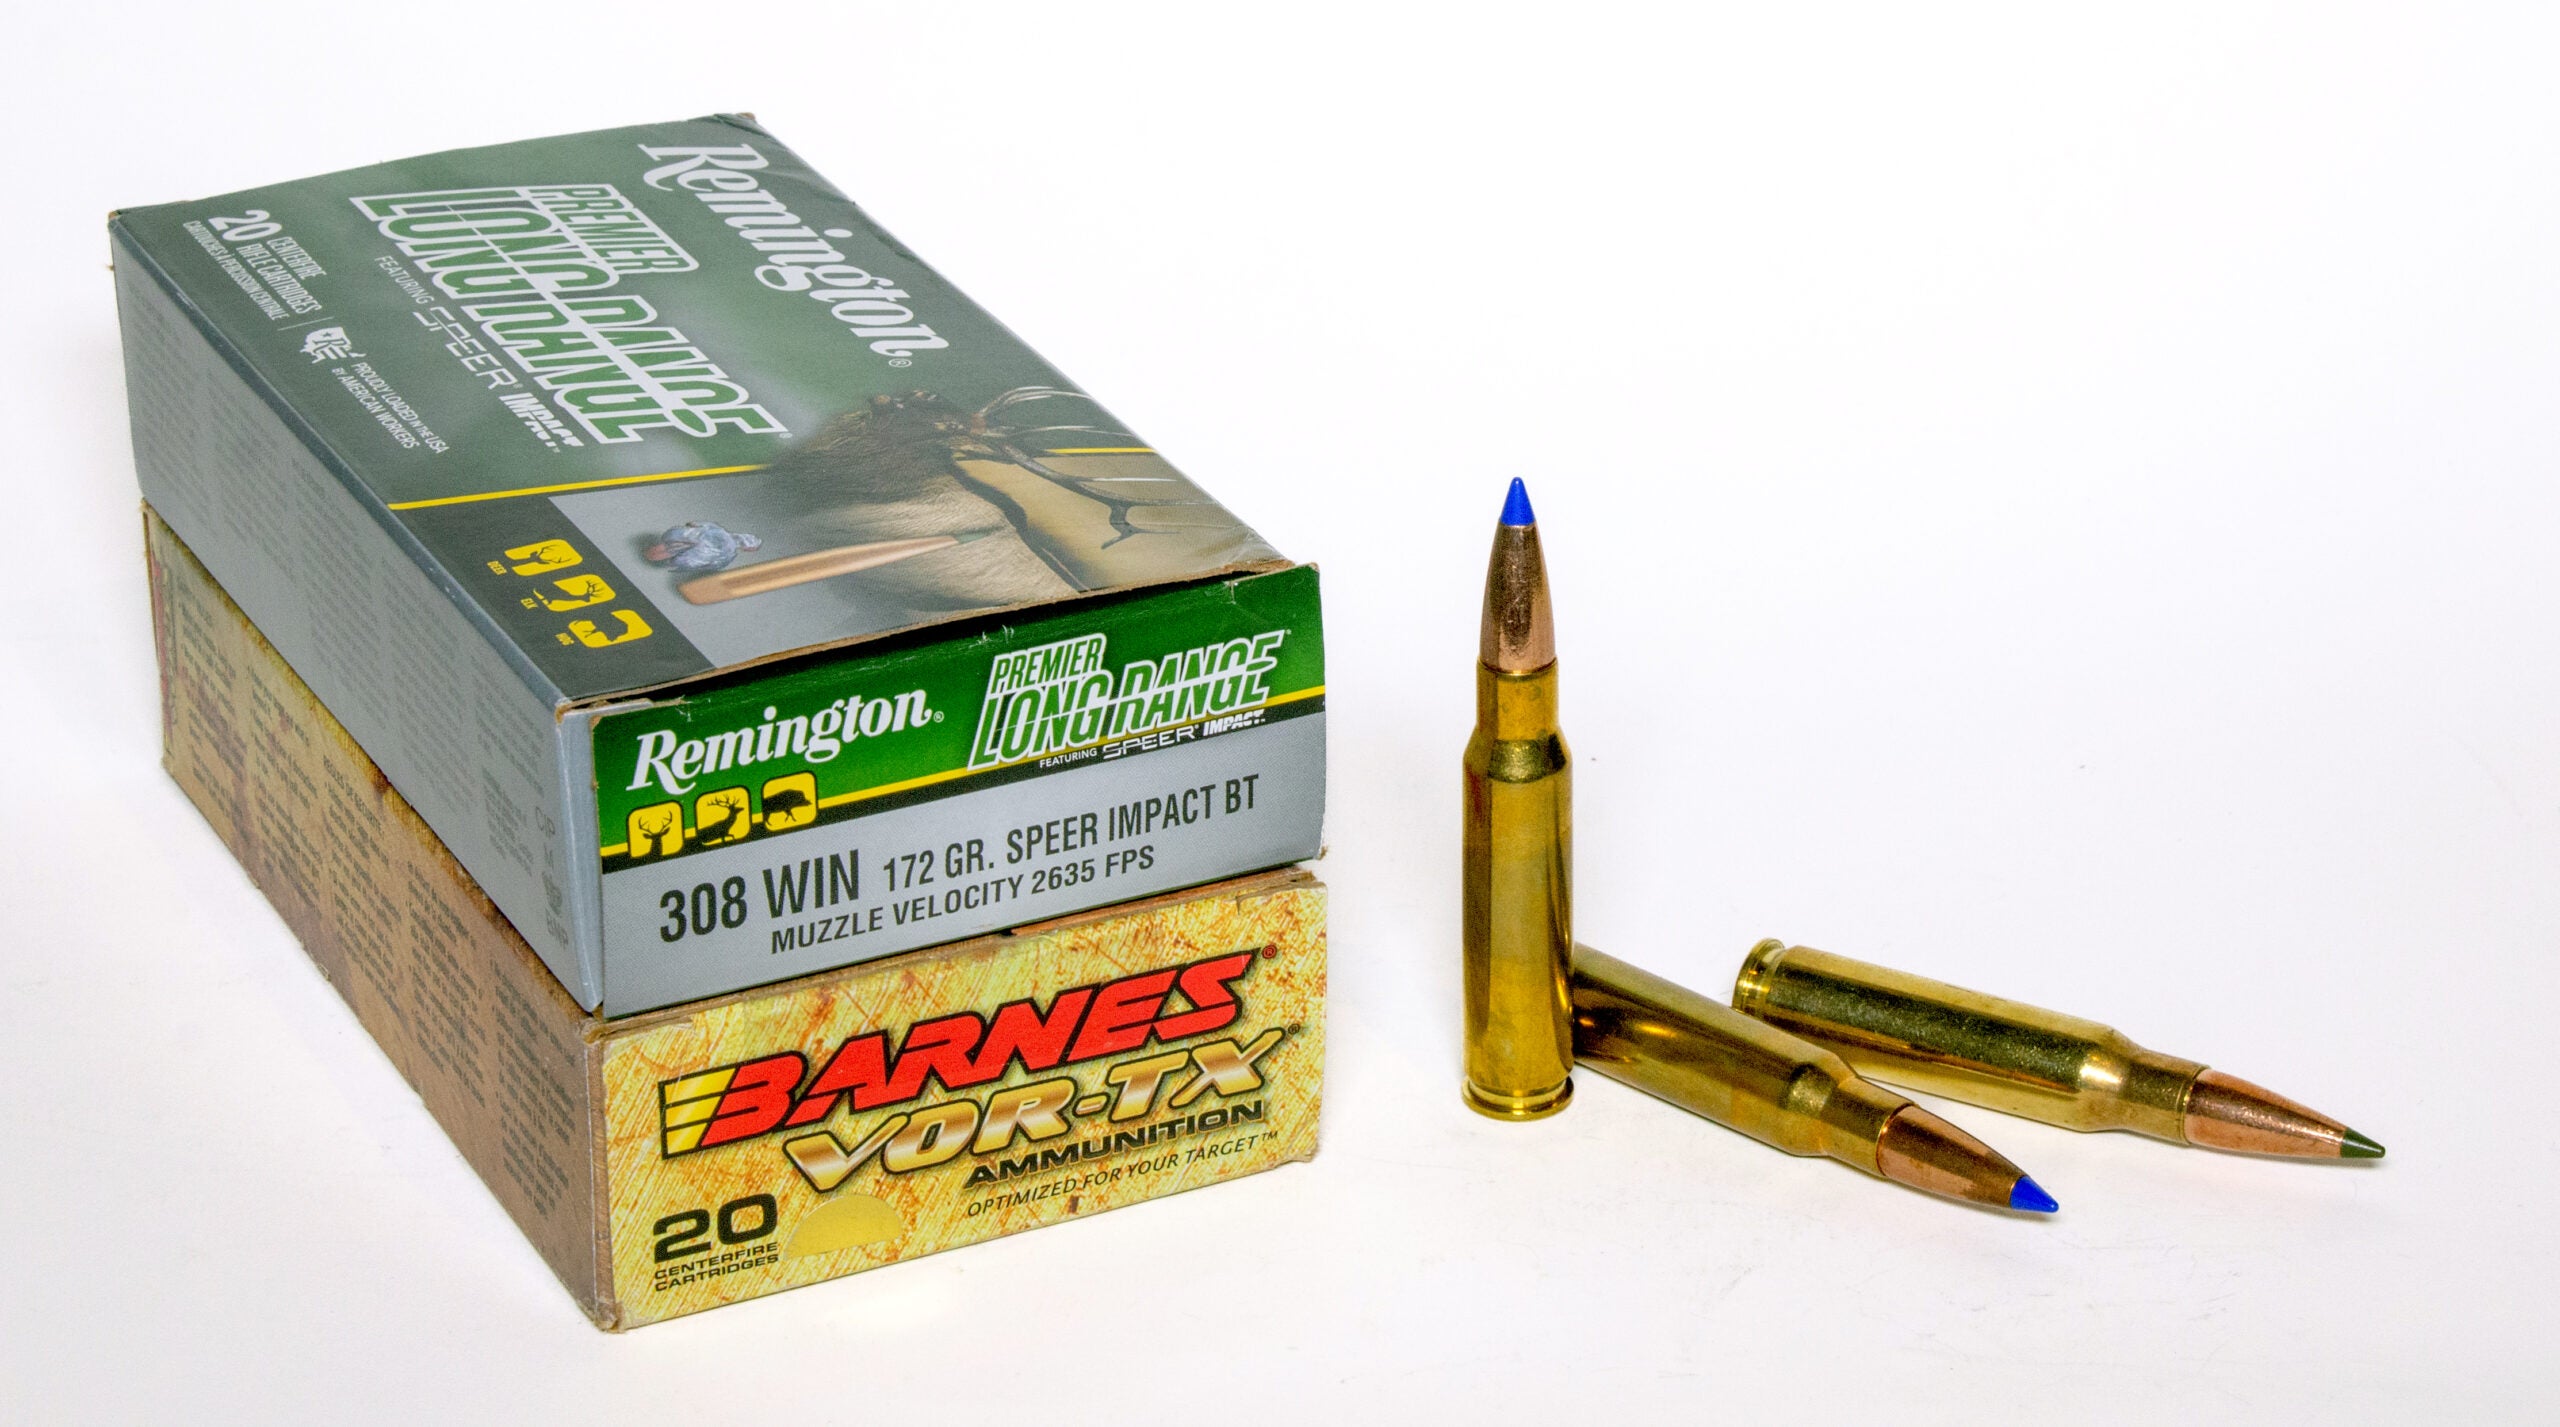 Two boxes of 308 Winchester ammo, plus three loose cartridges on a white background